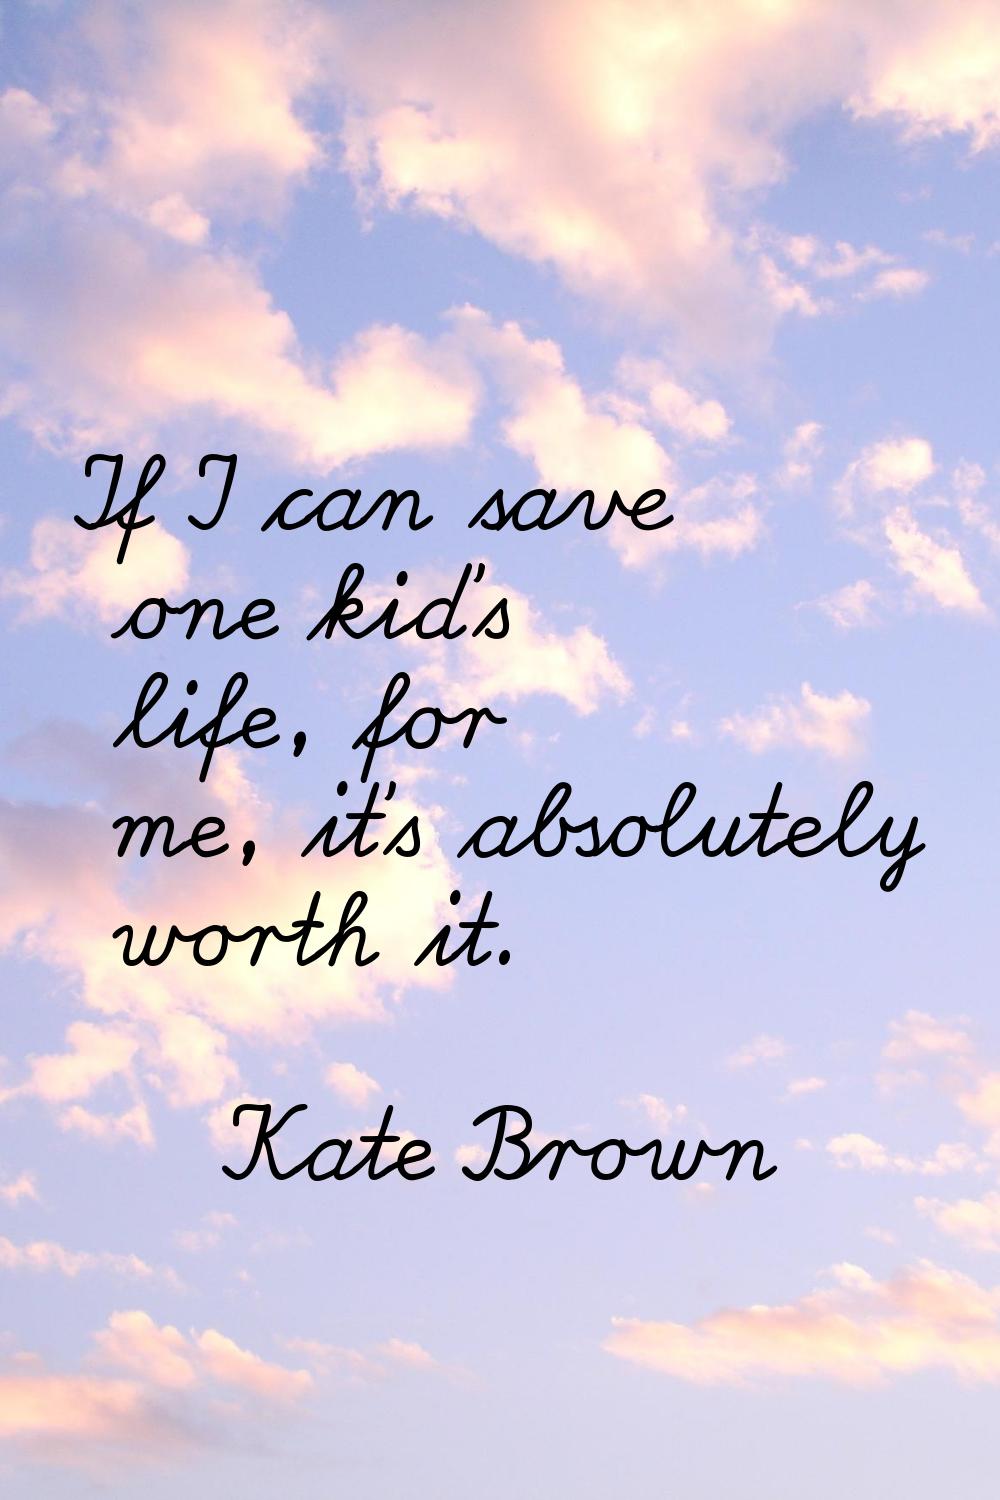 If I can save one kid's life, for me, it's absolutely worth it.